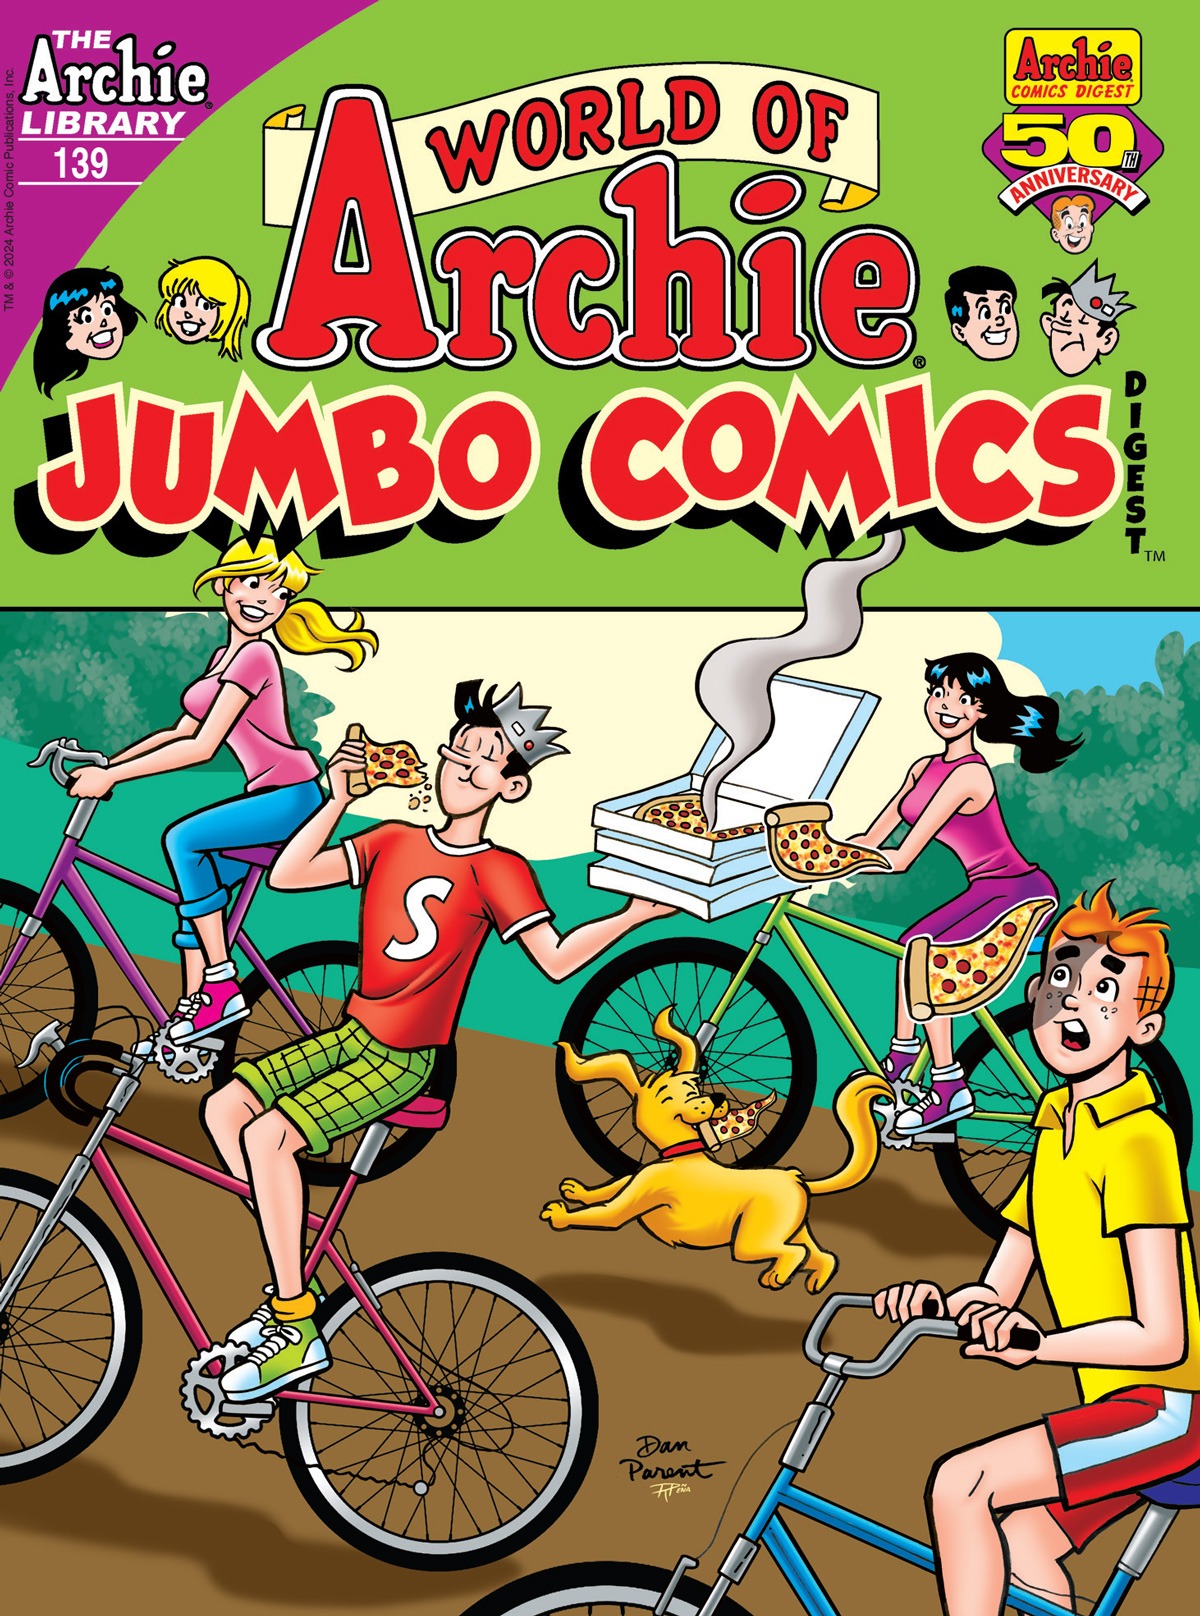 Cover of World of Archie Jumbo Comics #139, showing Betty, Jughead, Veronica, and Archie riding bicycles on a dirt path in a park, with Hot Dog running alongside. Jughead is holding a stack of pizza boxes and eating a slice. The top box is open and slices are blowing out; Hot Dog has one in his mouth and is simling. Another is about to hit Archie in the face. He looks startled.